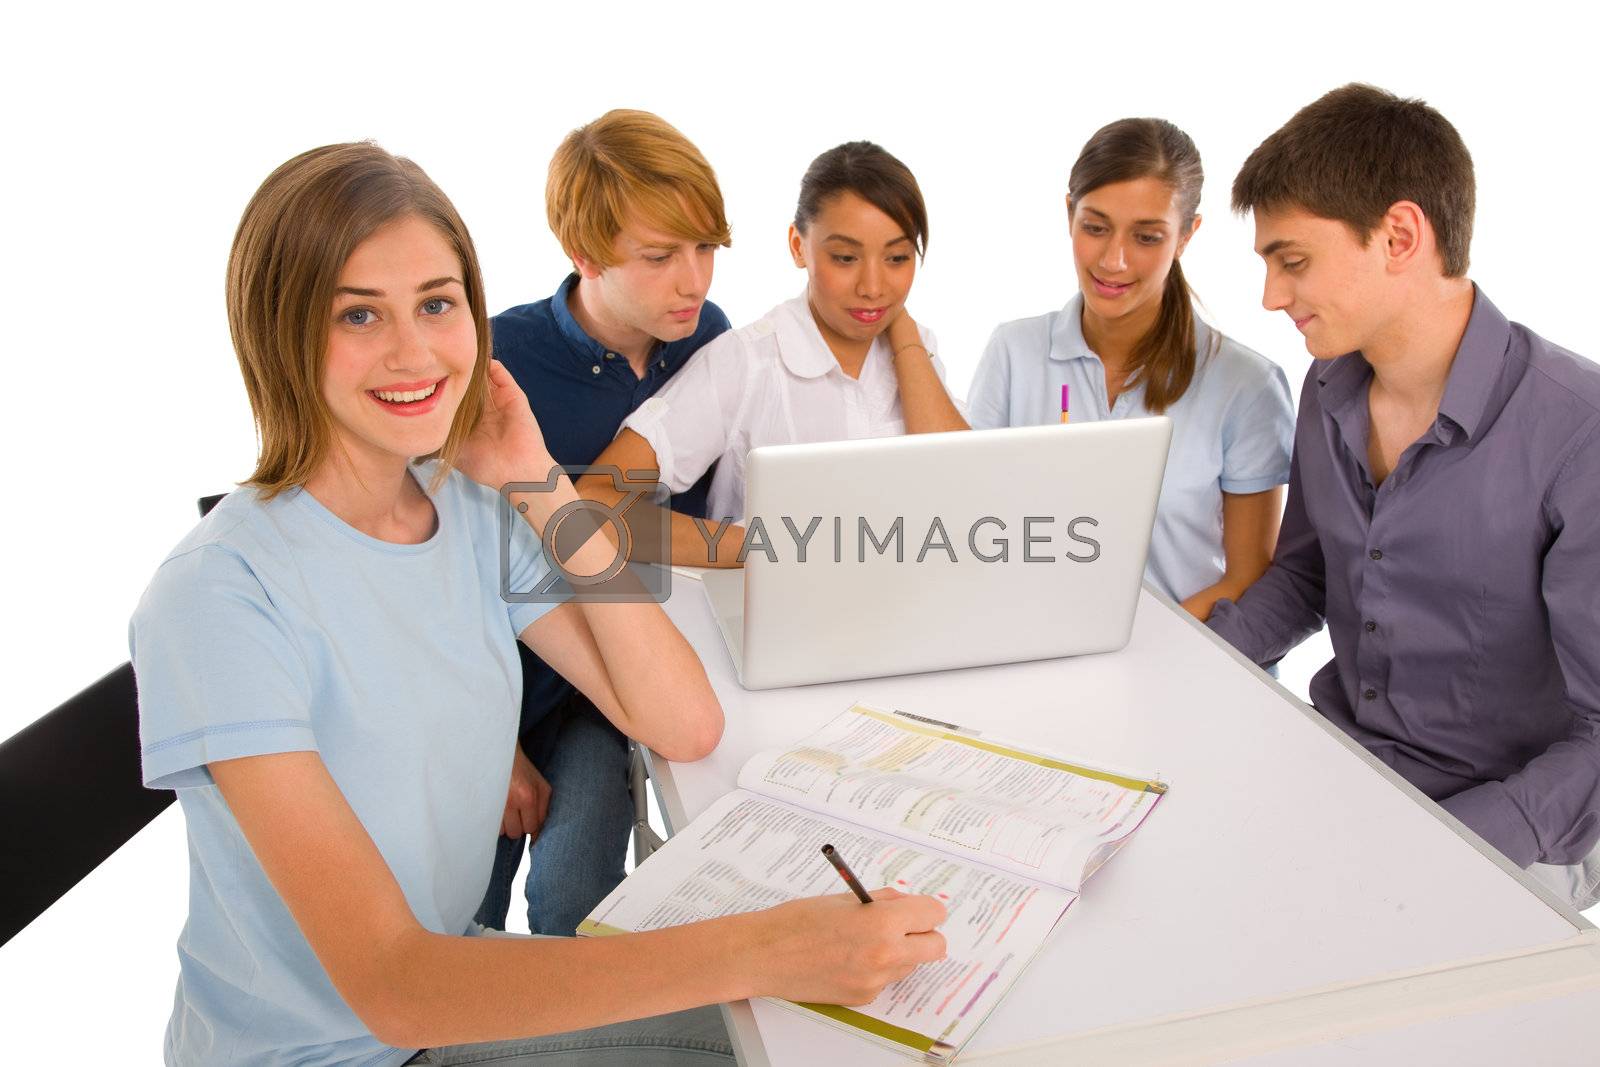 Royalty free image of teenagers studying together by ambro